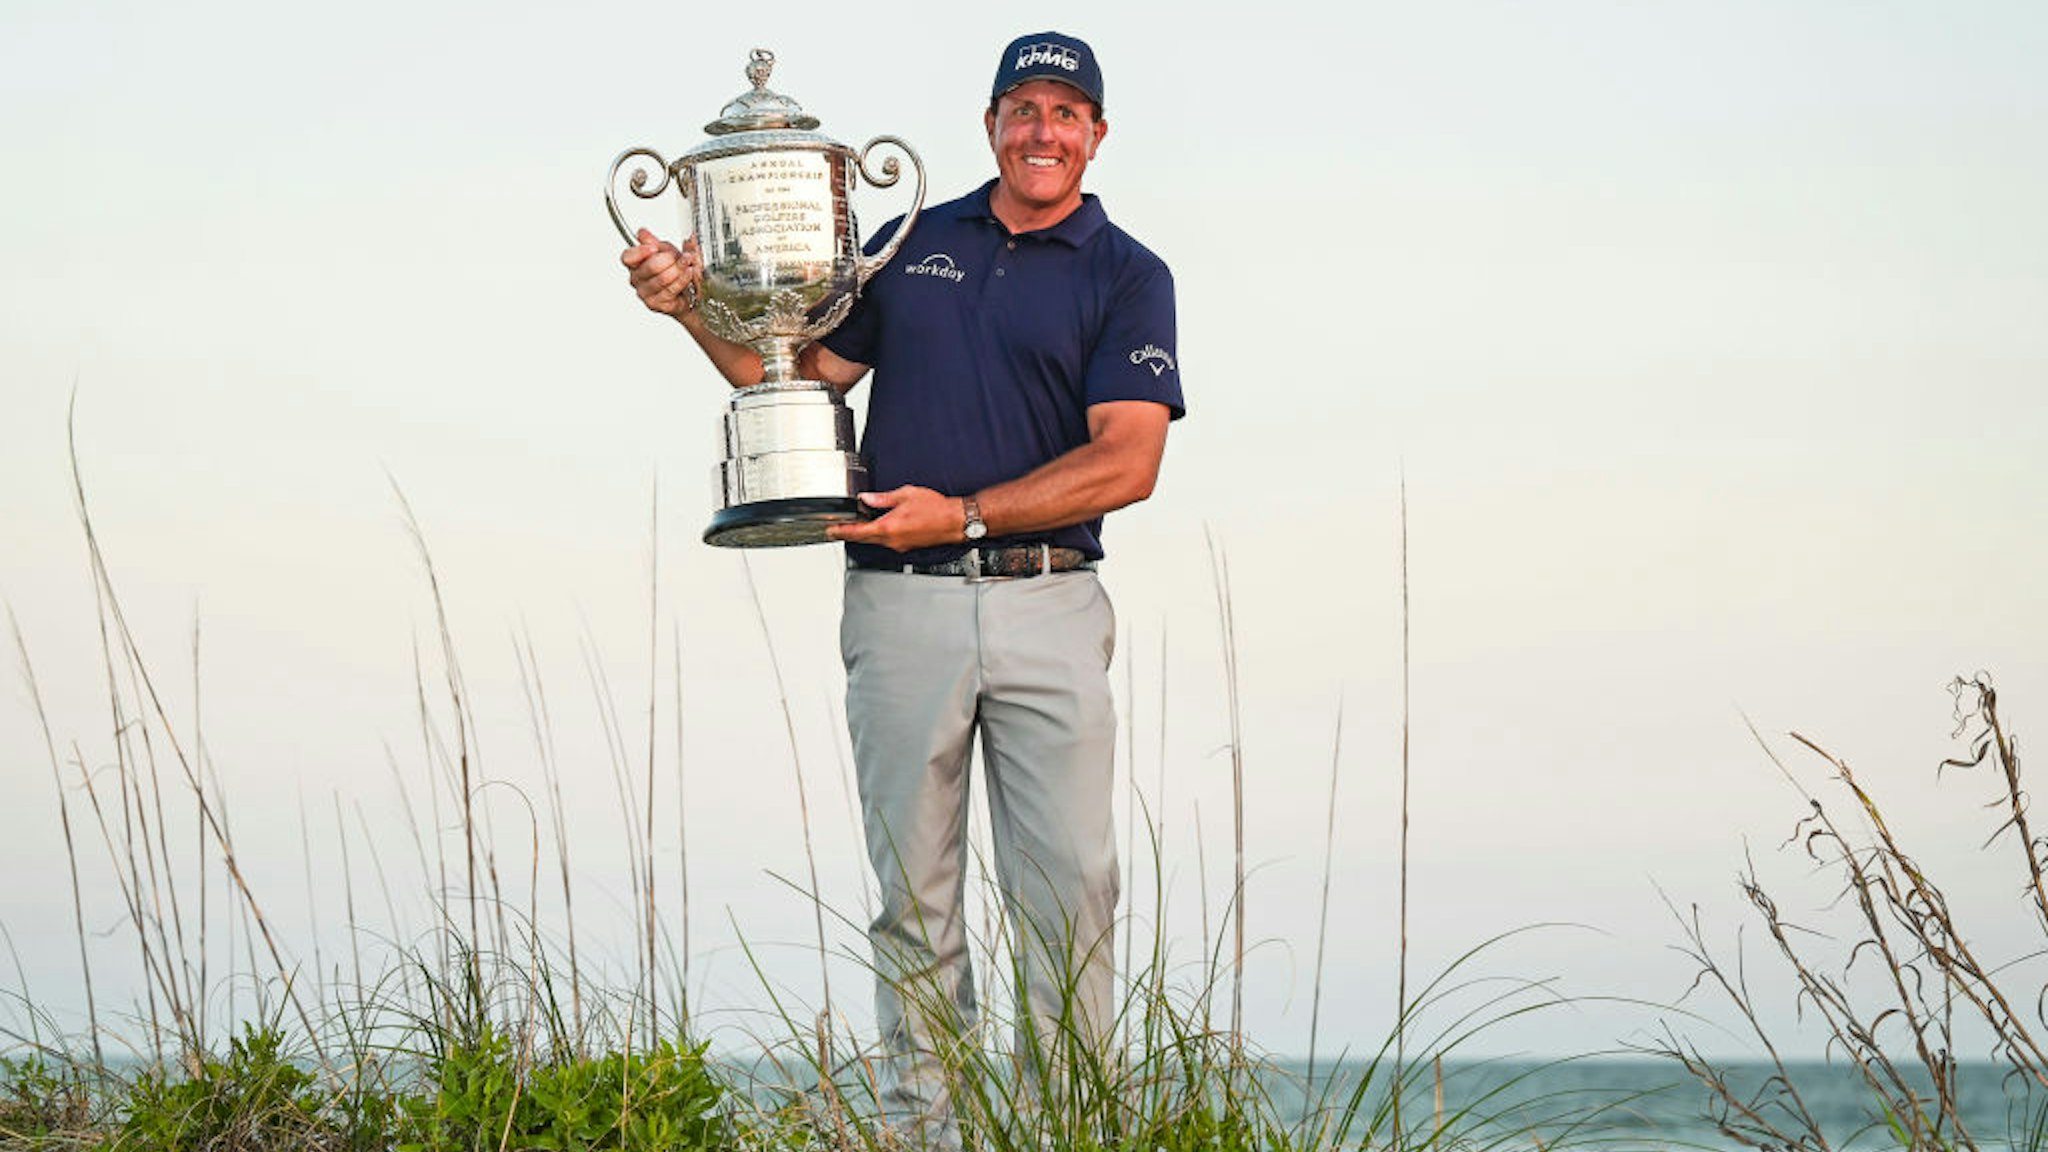 KIAWAH ISLAND, SC - MAY 23: Phil Mickelson smiles with the Wanamaker Trophy after his two stroke victory in the final round of the PGA Championship on The Ocean Course at Kiawah Island Golf Resort on May 23, 2021, in Kiawah Island, South Carolina. (Photo by Keyur Khamar/PGA TOUR via Getty Images)